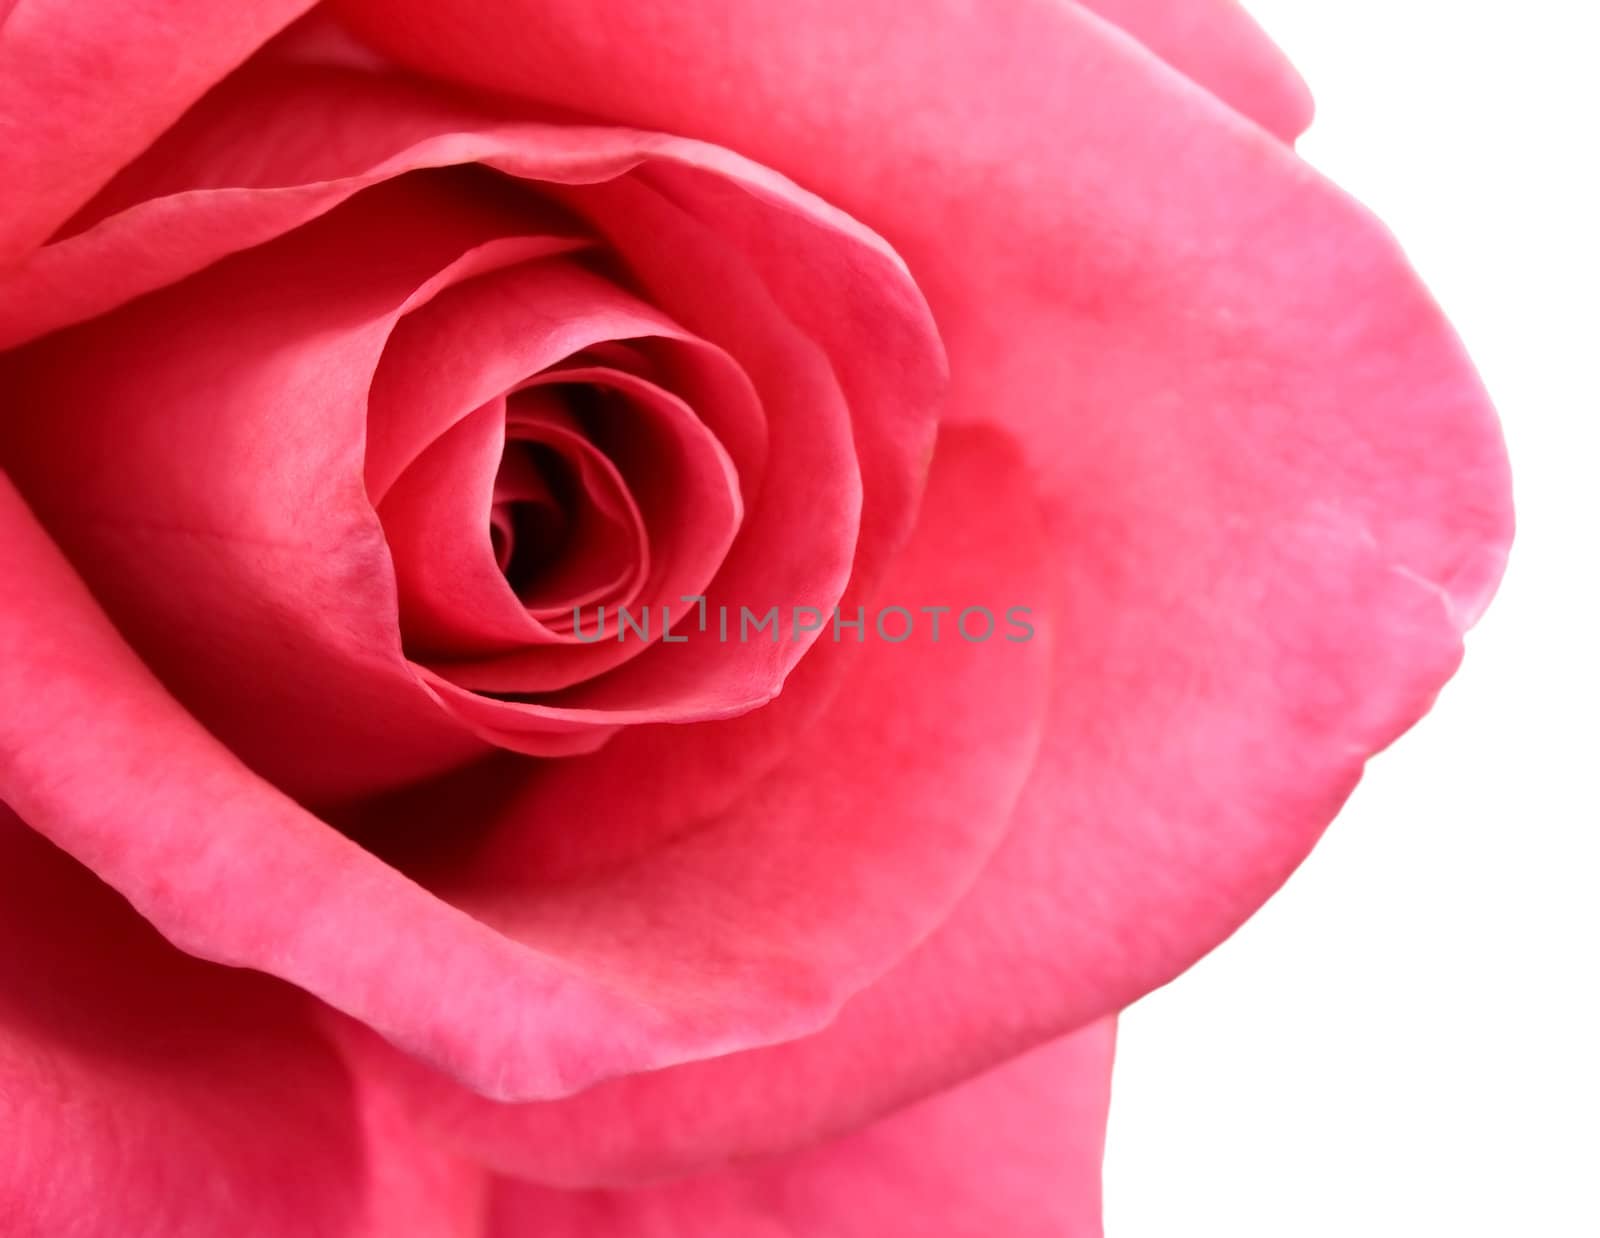 red rose flower close-up isolated on white background